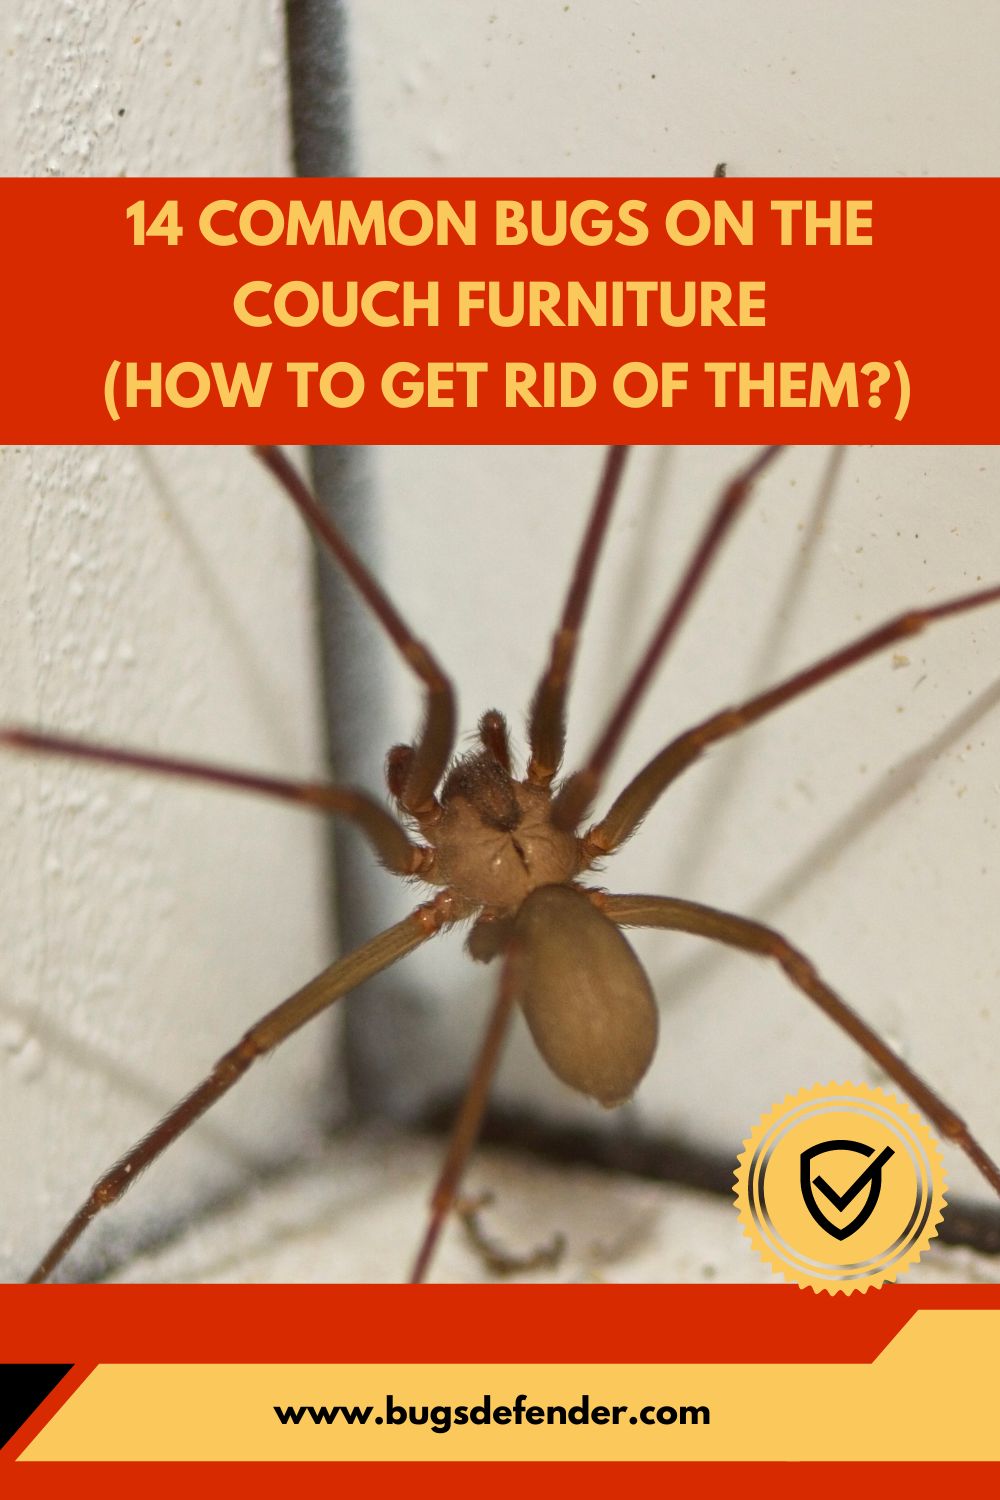 14 Common Bugs on the Couch Furniture pin2